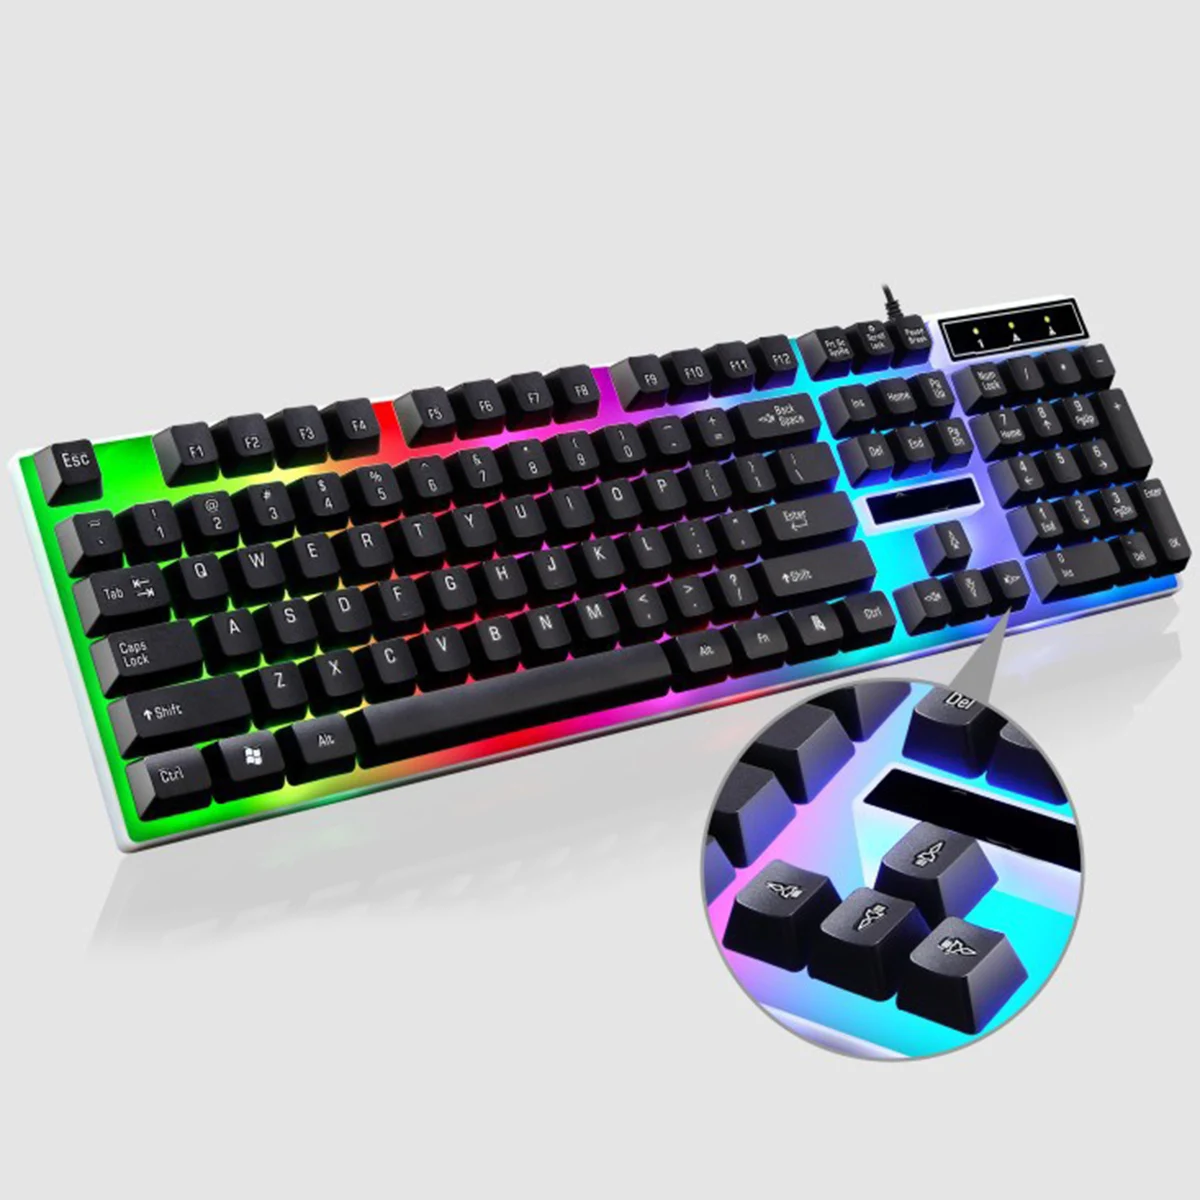 

104 keys Gaming Keyboard Mouse Set Wired USB Ergonomic Keyboard Mouse with RGB Backlit with Win XP/7/8, Mac 10.2 or latest